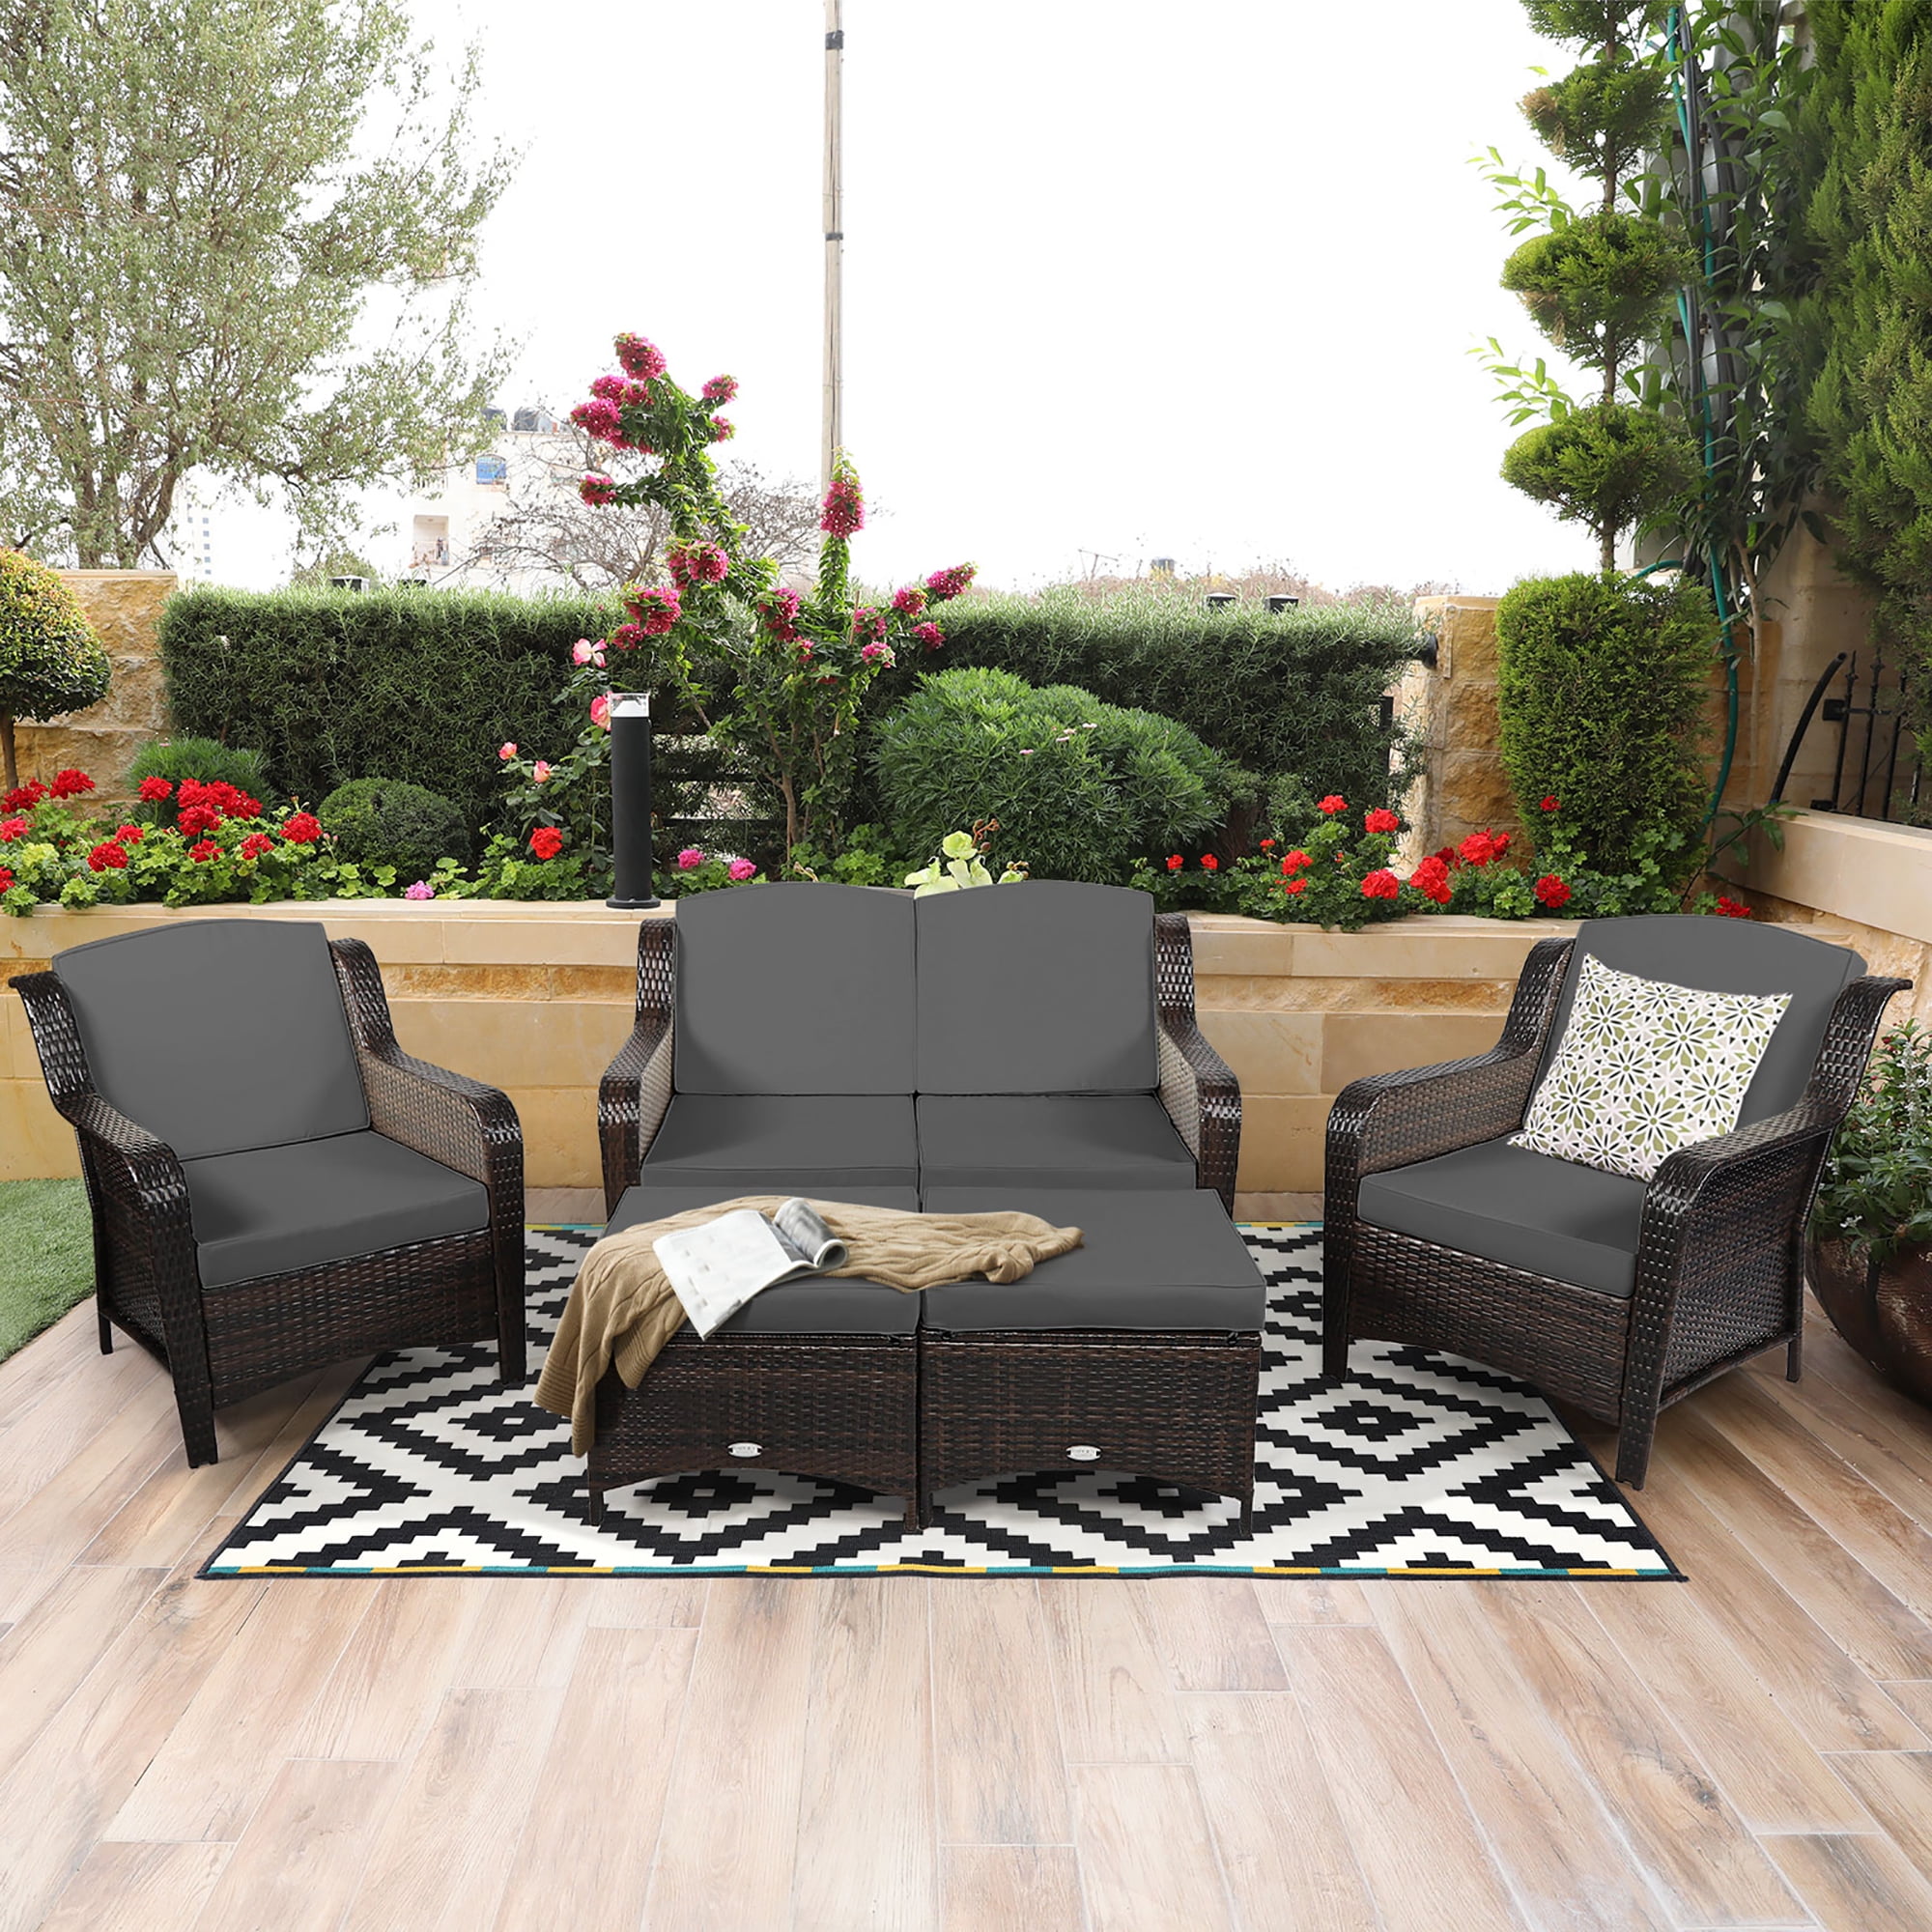 Cloud Mountain Patio Loveseat Outdoor 2 PCs Loveseat Furniture Set Garden Patio Love Seat Bench Sofa with Cushions Gradient Brown 